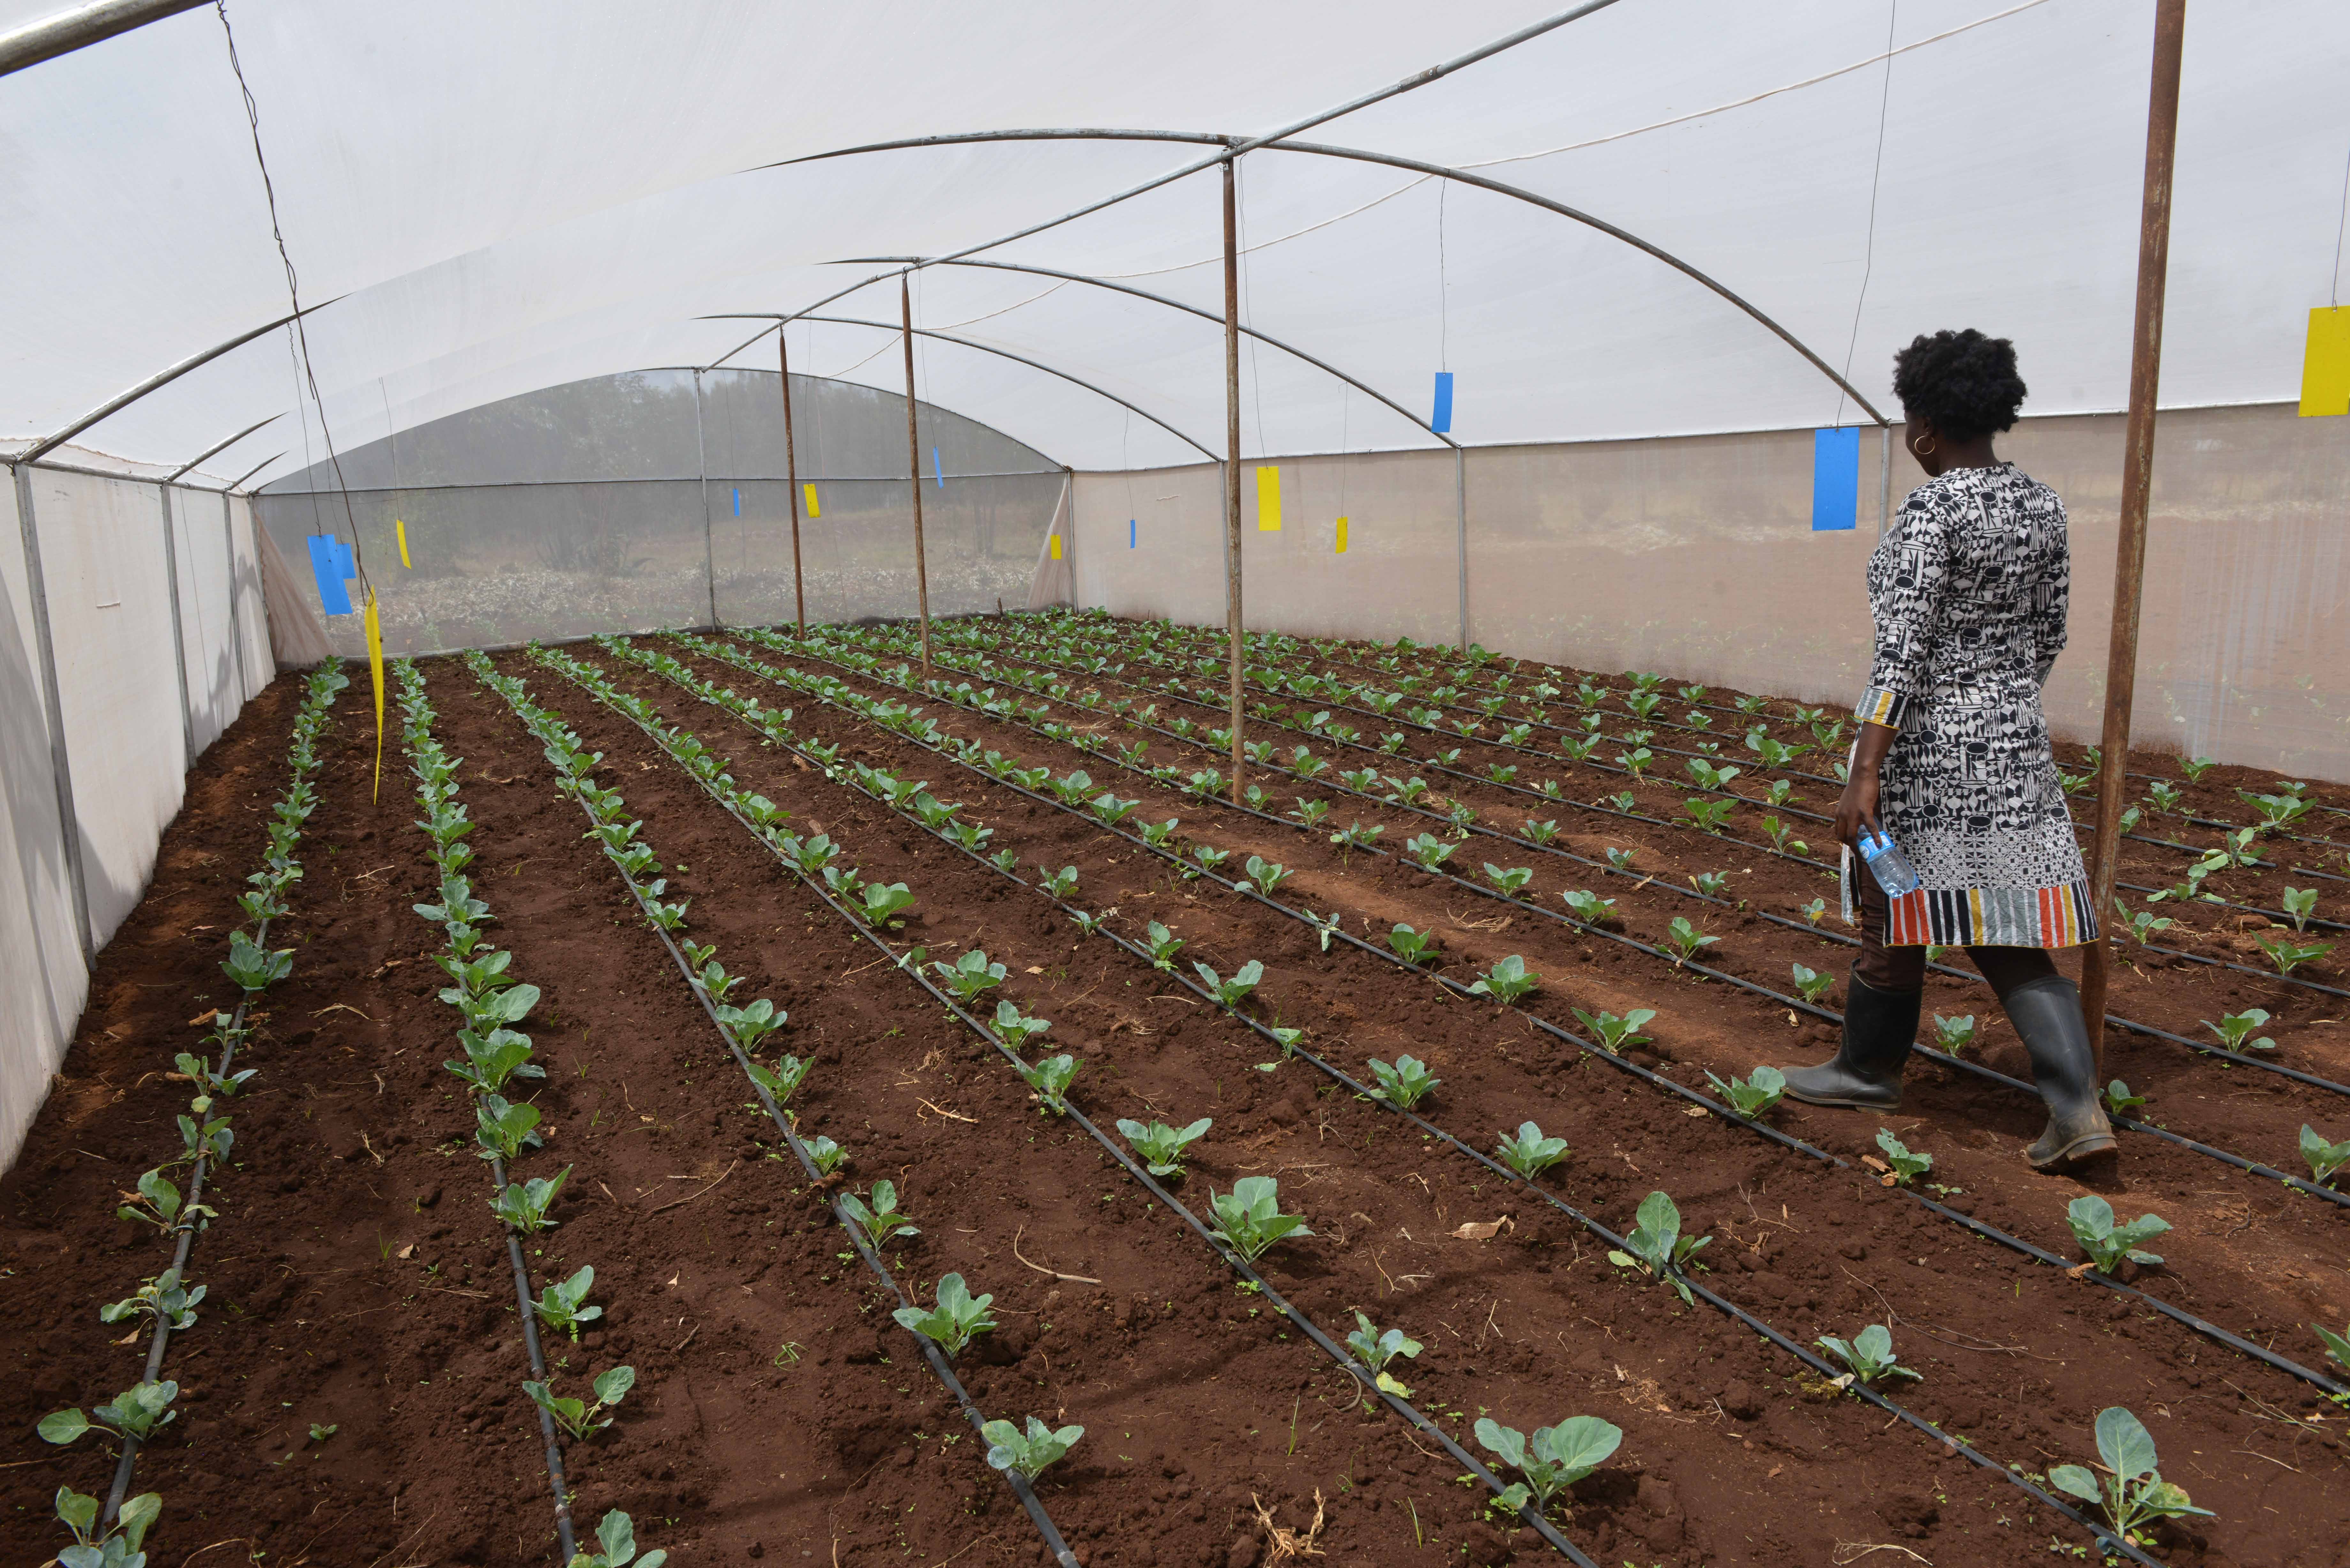 Woman walking through net house amid neat rows of vegetable plants.